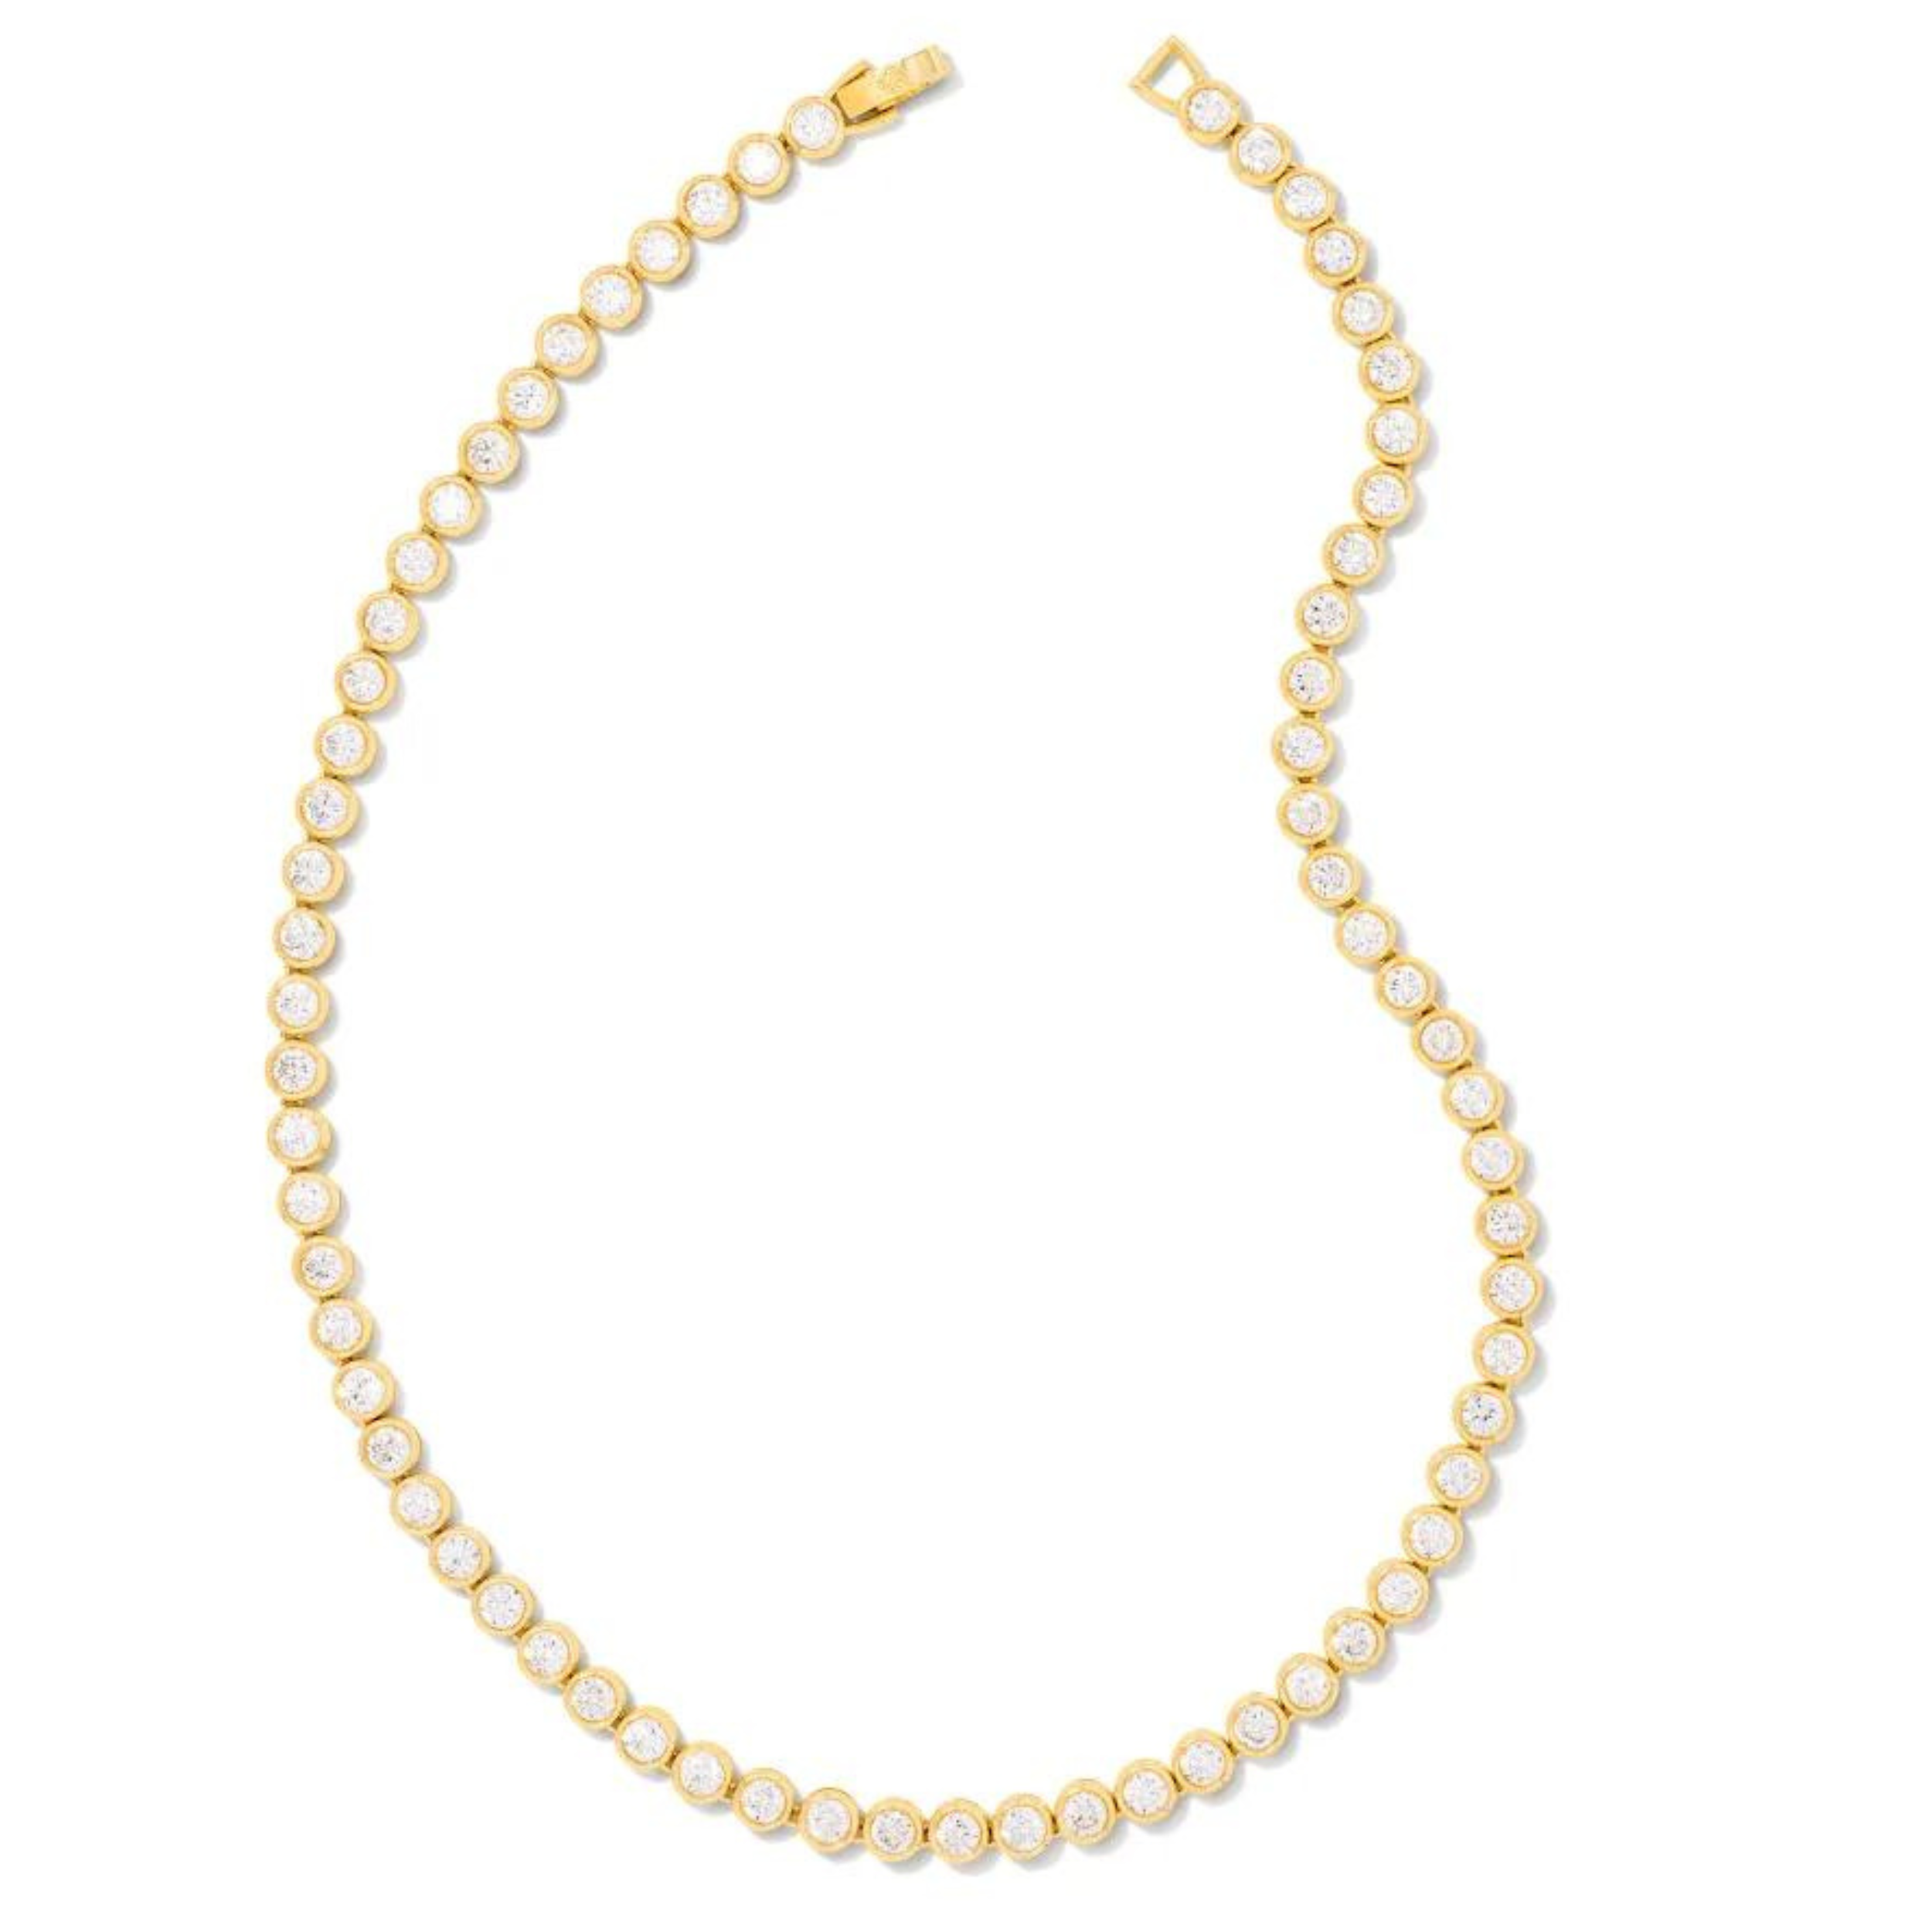 Gold tennis necklace with white crystals, pictured on a white background.